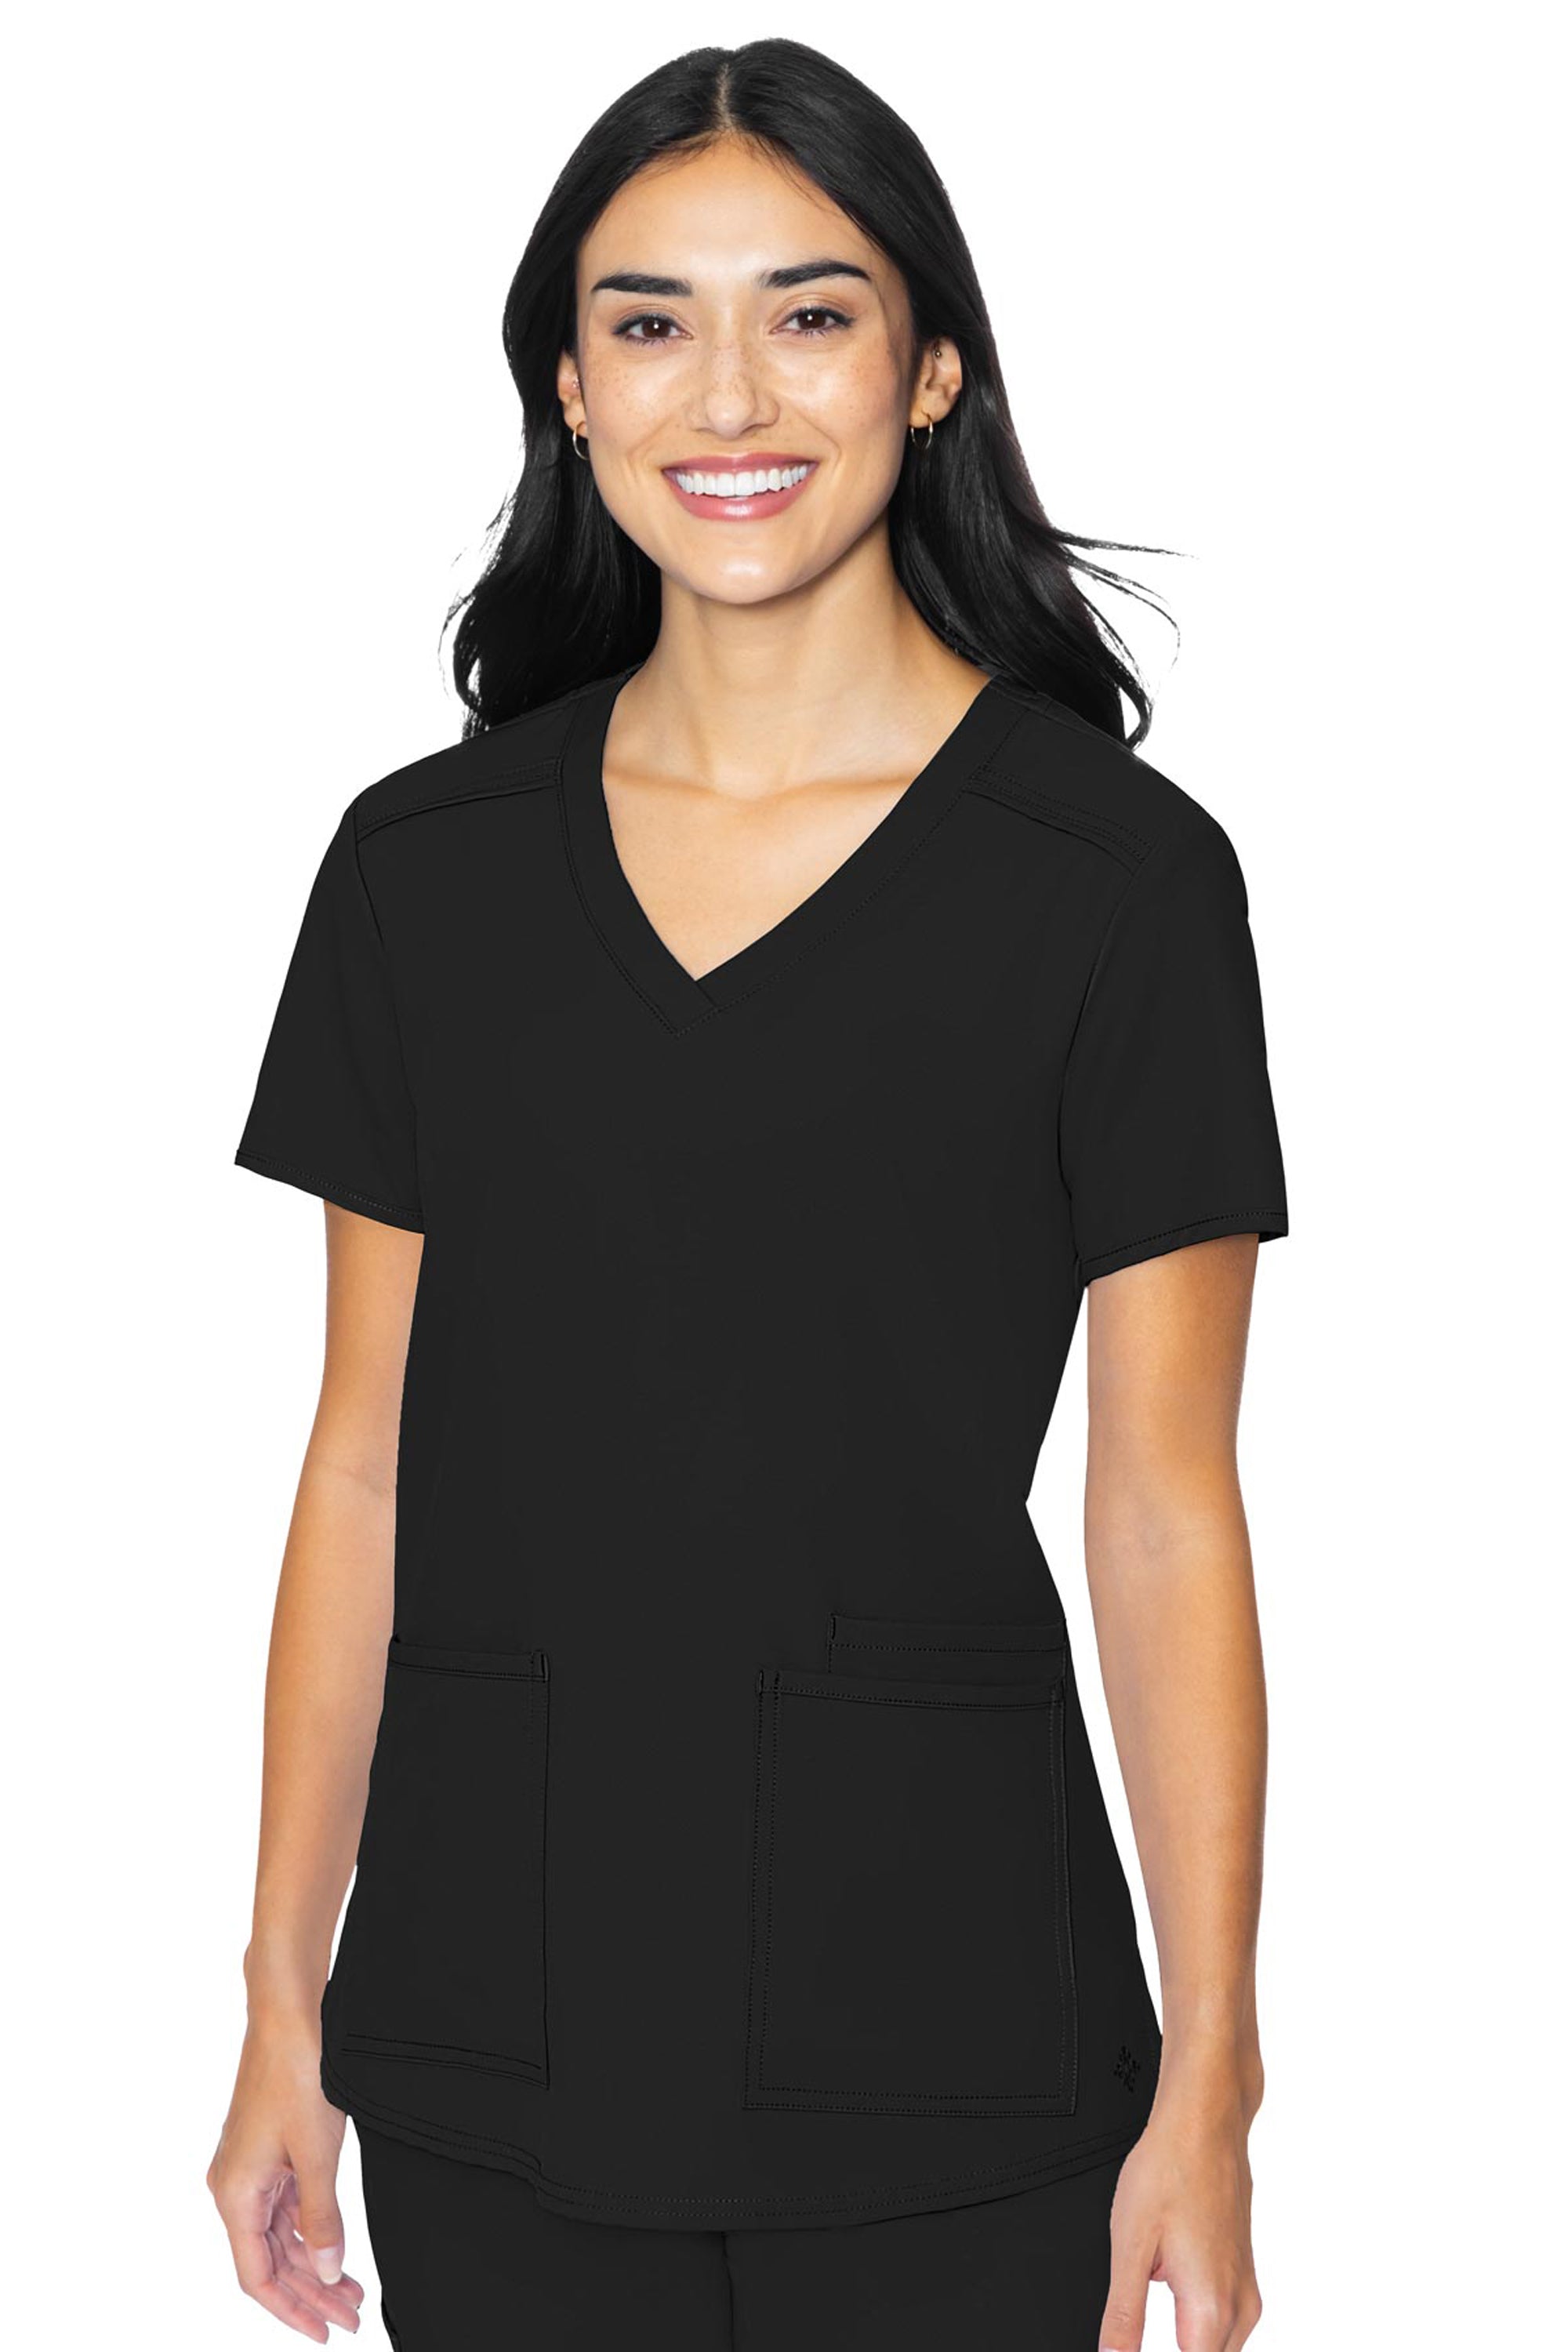 Women's Med Couture Insight 3 Pocket Top